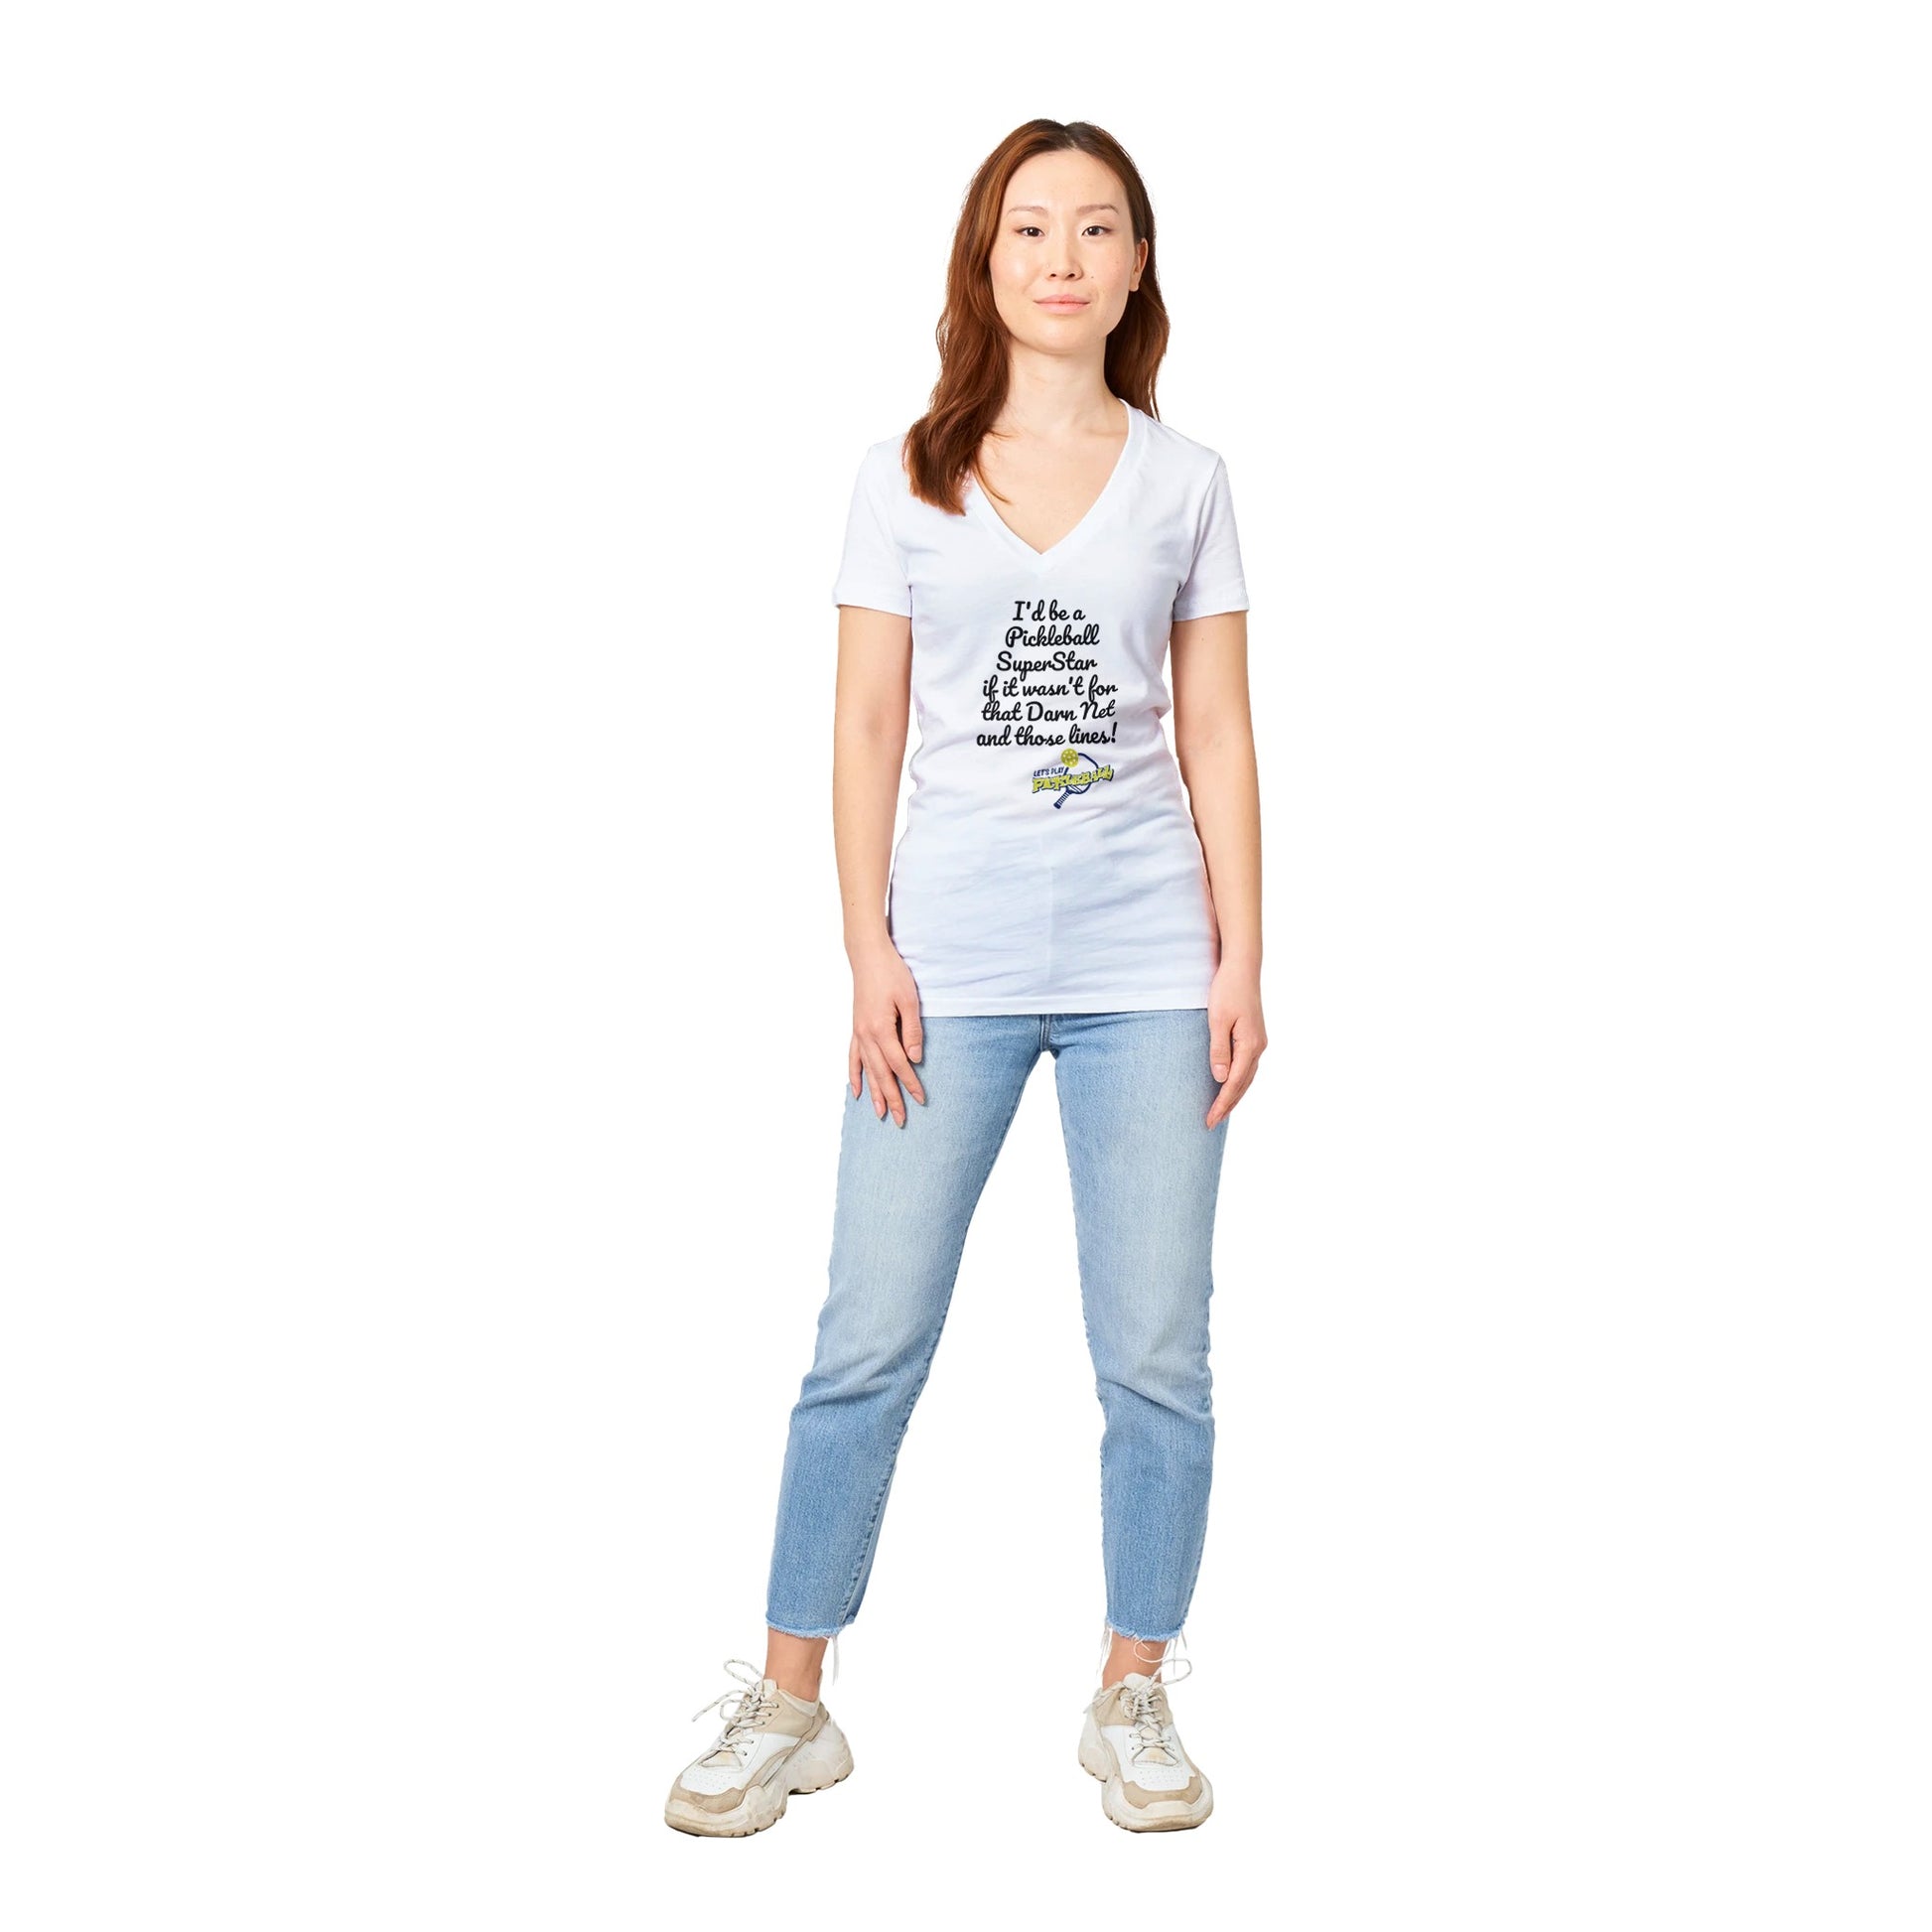 A premium women’s V-neck t-shirt with original logo I'd be a PickleBall SuperStar if it wasn't for that Darn Net and those lines and Let's Play Pickleball logo on front from WhatYa Say Apparel worn by Asian Female model standing looking forward.